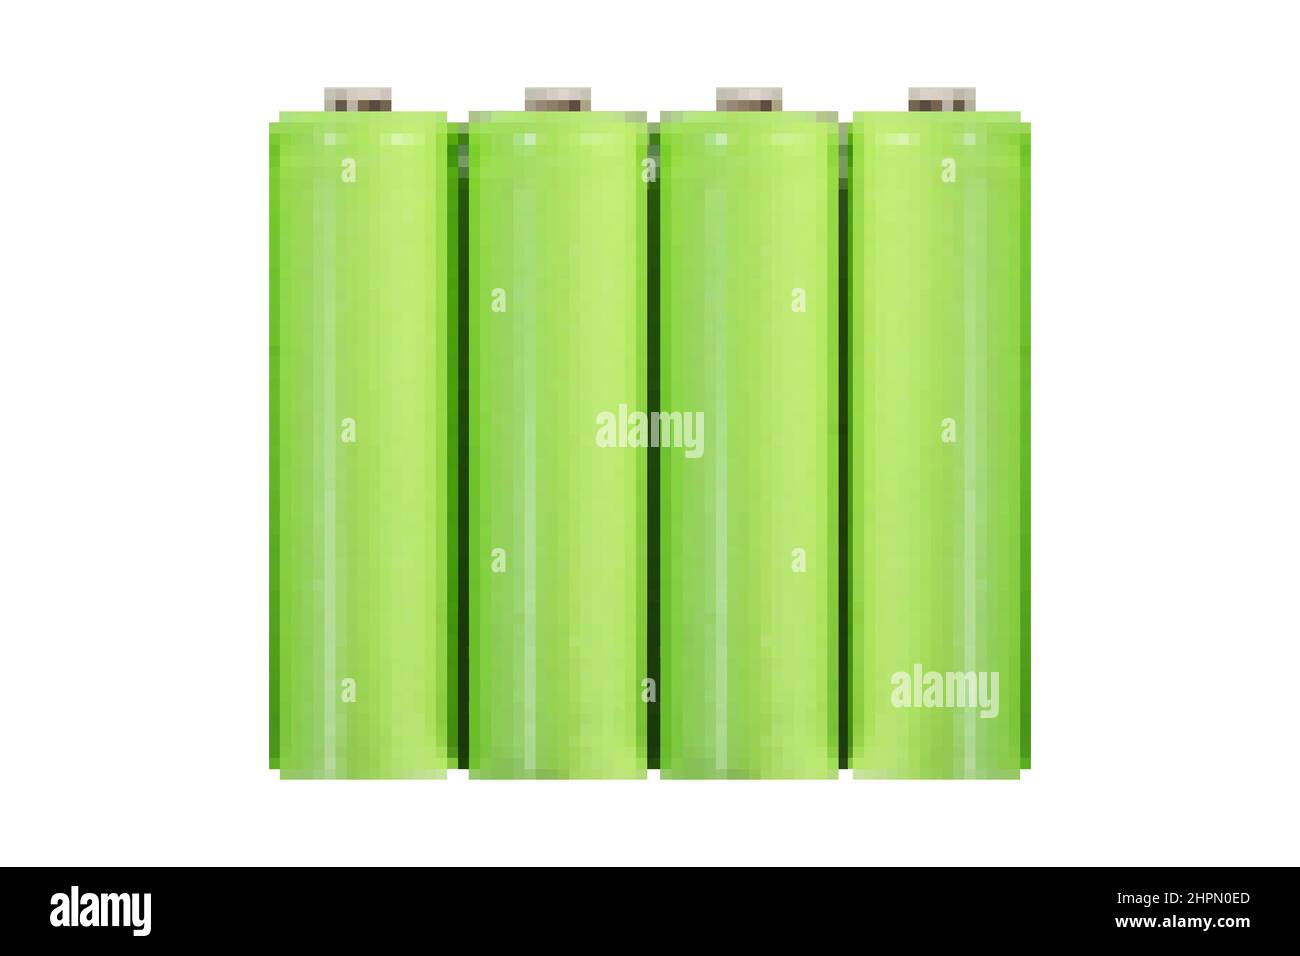 Pixel artwork illustration of green colored rechargeable batteries isolated on white background. Stock Photo